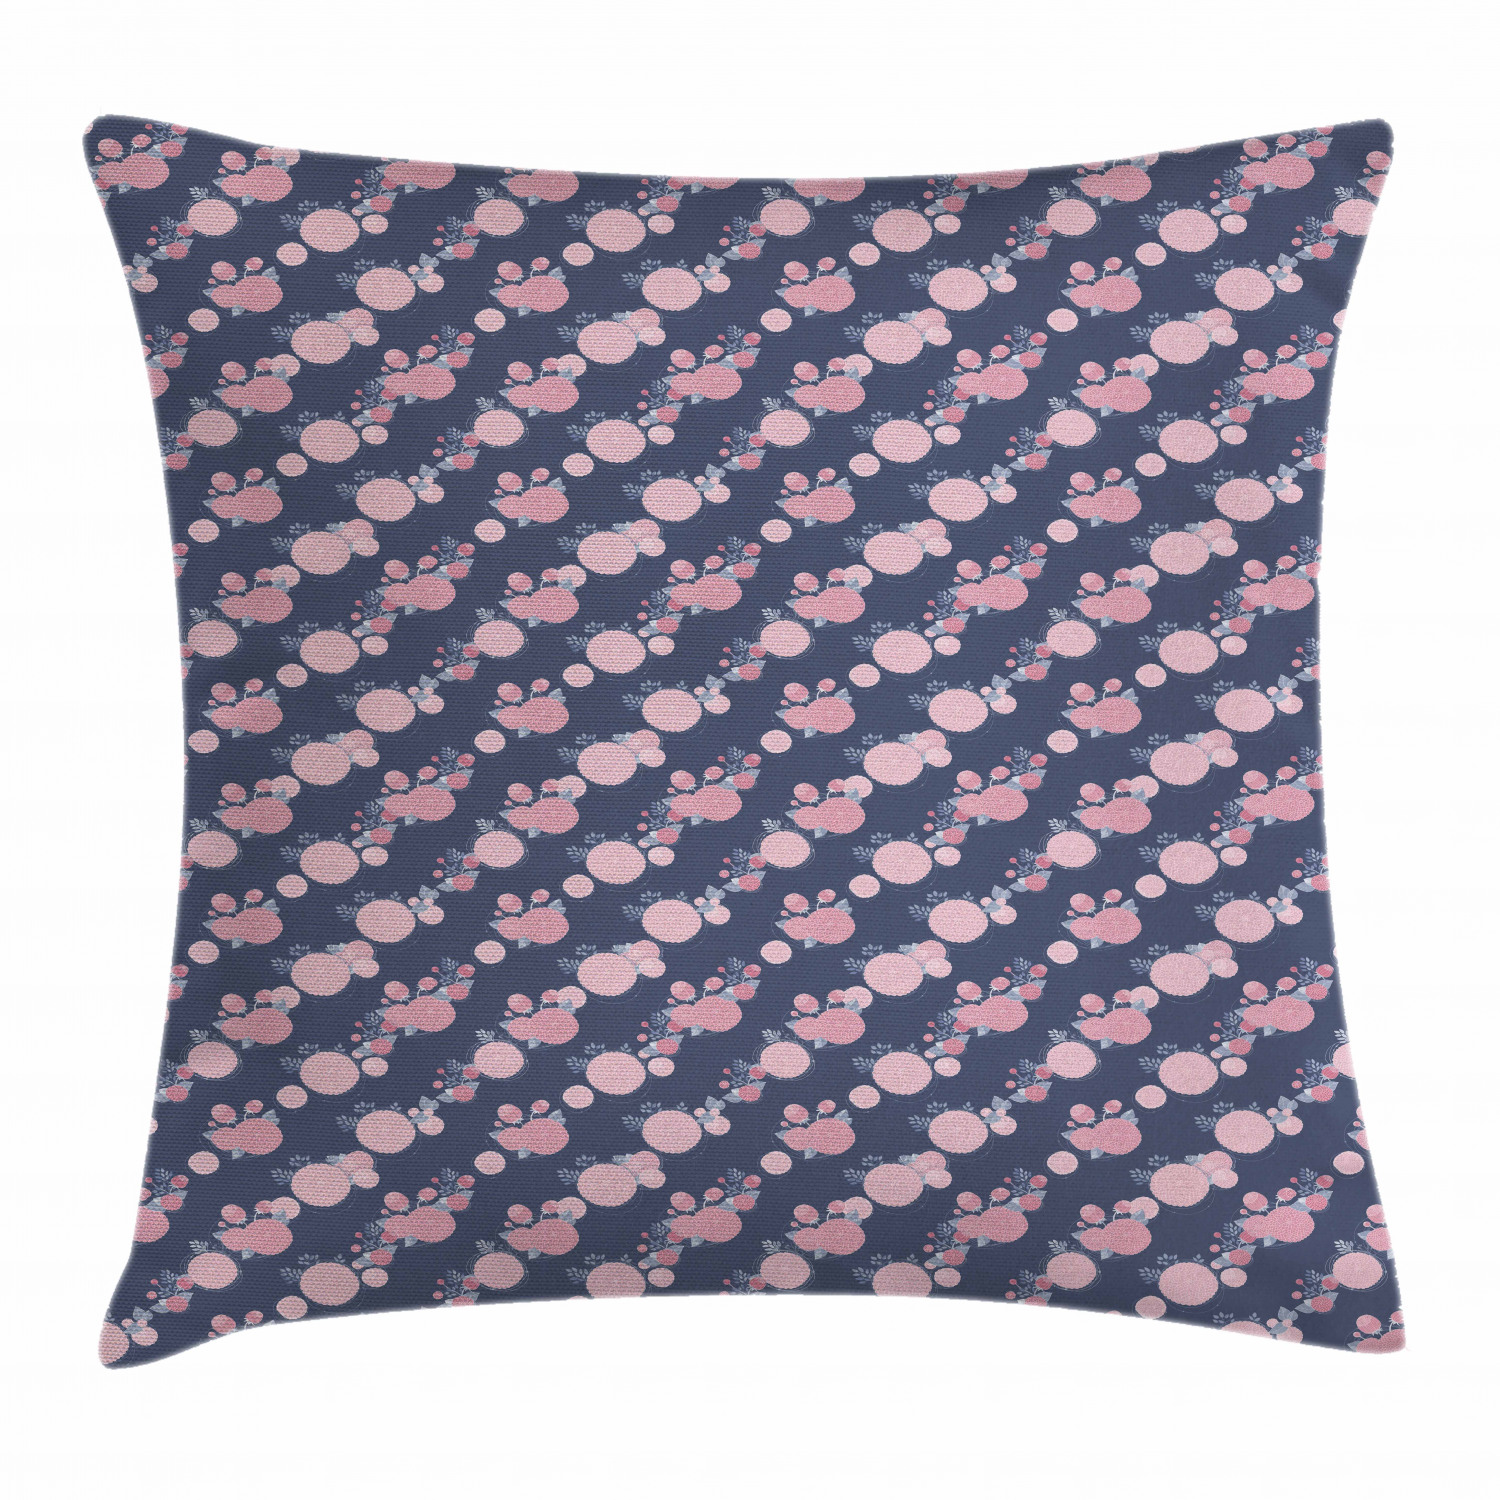 Garden Art Throw Pillow Cushion Cover, Pattern with Rows of Abstract Pink Asters Romantic Garden Botany, Decorative Square Accent Pillow Case, 16 X 16 Inches, Dark Slate Blue Rose Blush, by Ambesonne - image 1 of 2